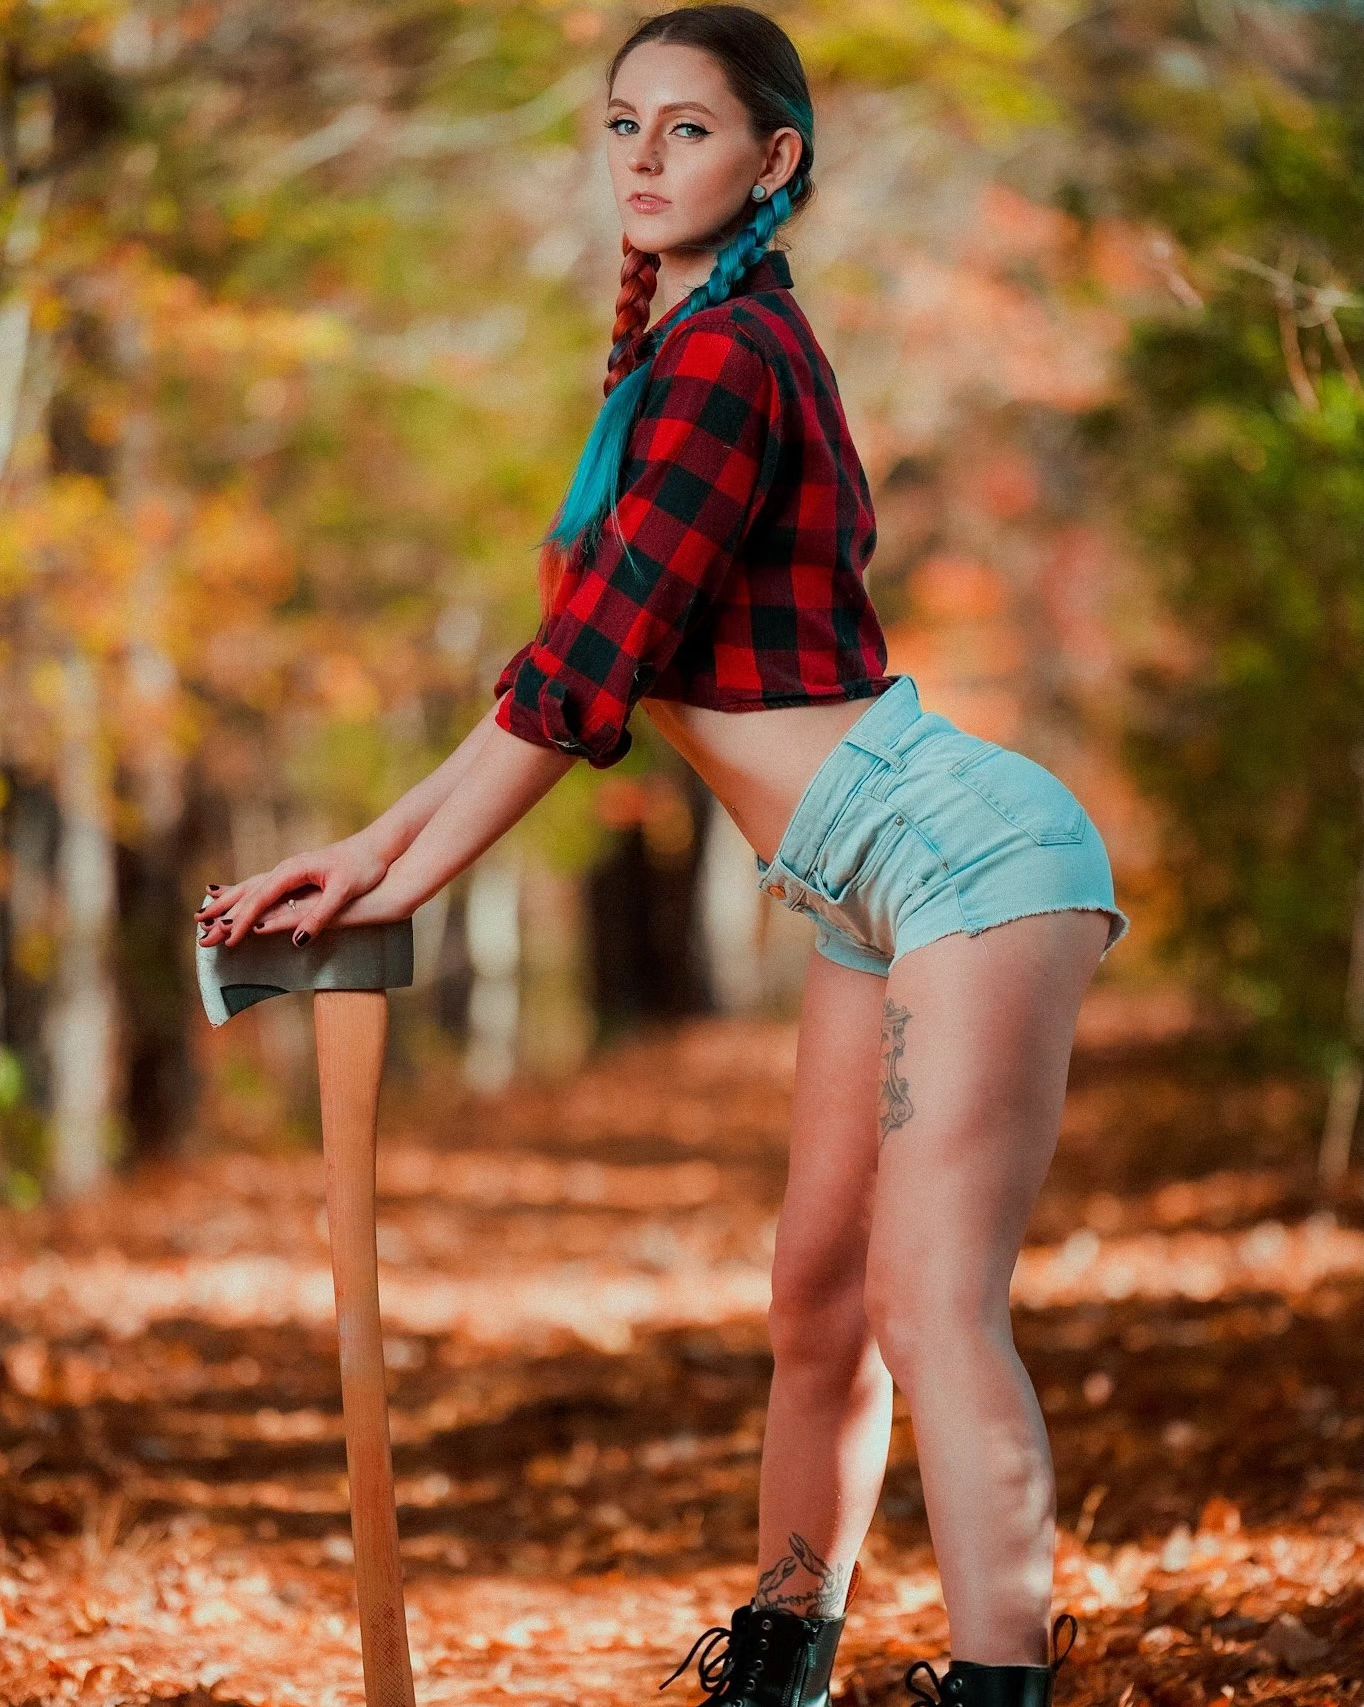 Is that hardwood in yer pants or are ya just happy to see me 🤭😏😅

Give me your best lumberjack joke! 

Amazing shots by @ernestojavier.photography